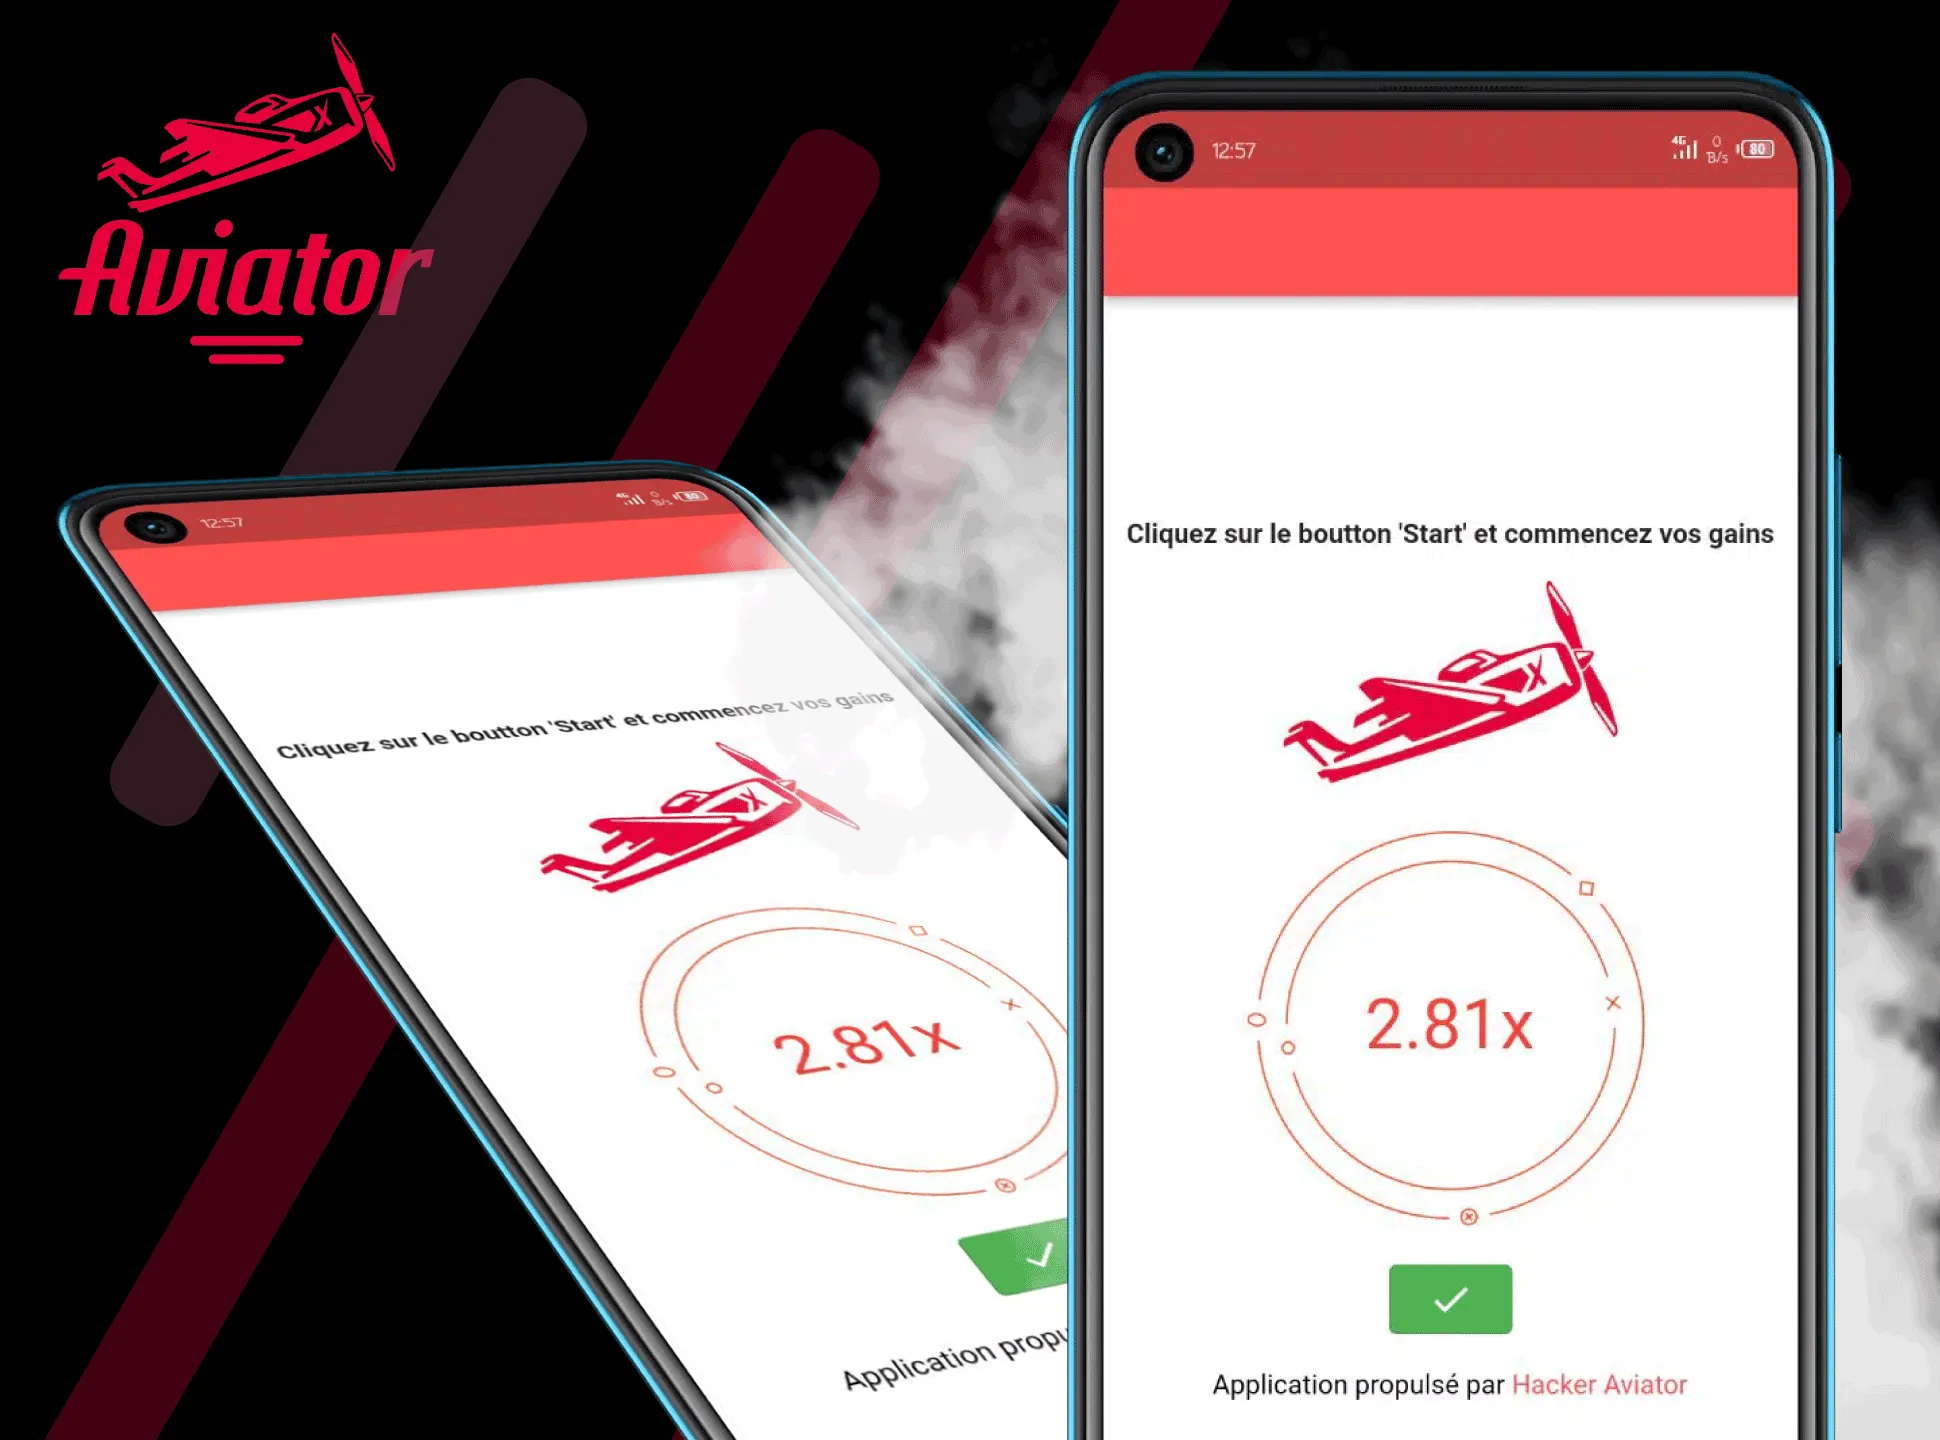 Play Aviator via the mobile browser if you don;t want to download an app.